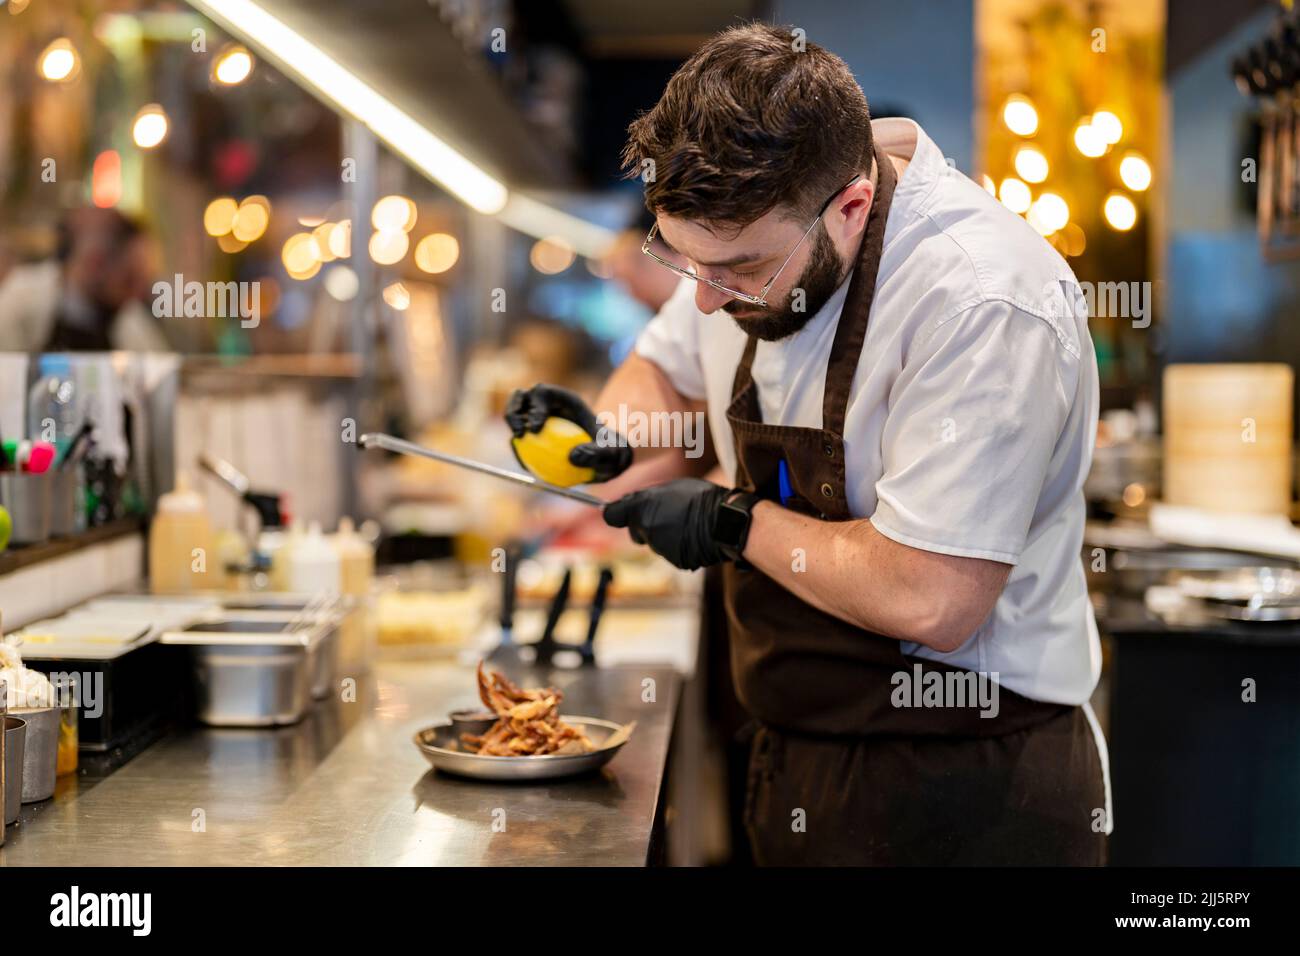 Chef wearing glove grating lemon on food in plate Stock Photo